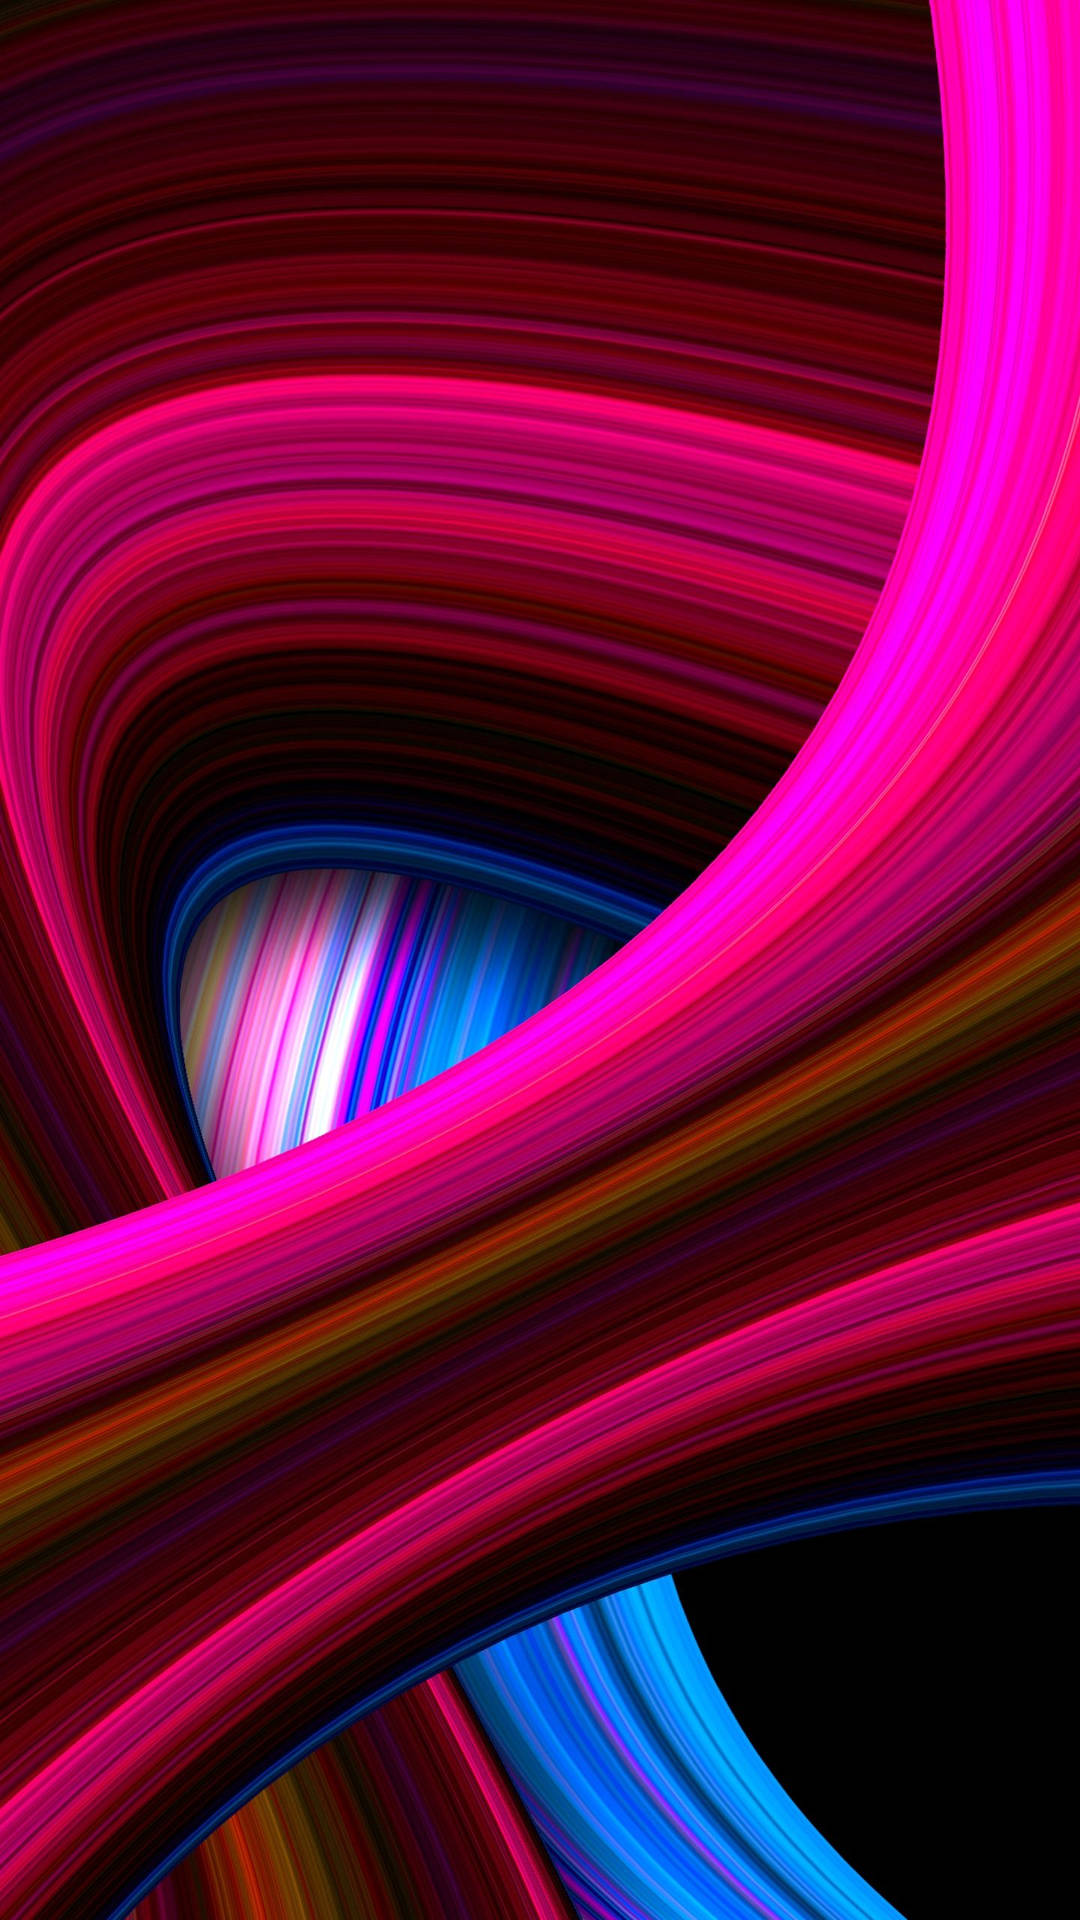 Samsung Galaxy S20 With Vibrant Waves Wallpaper Background